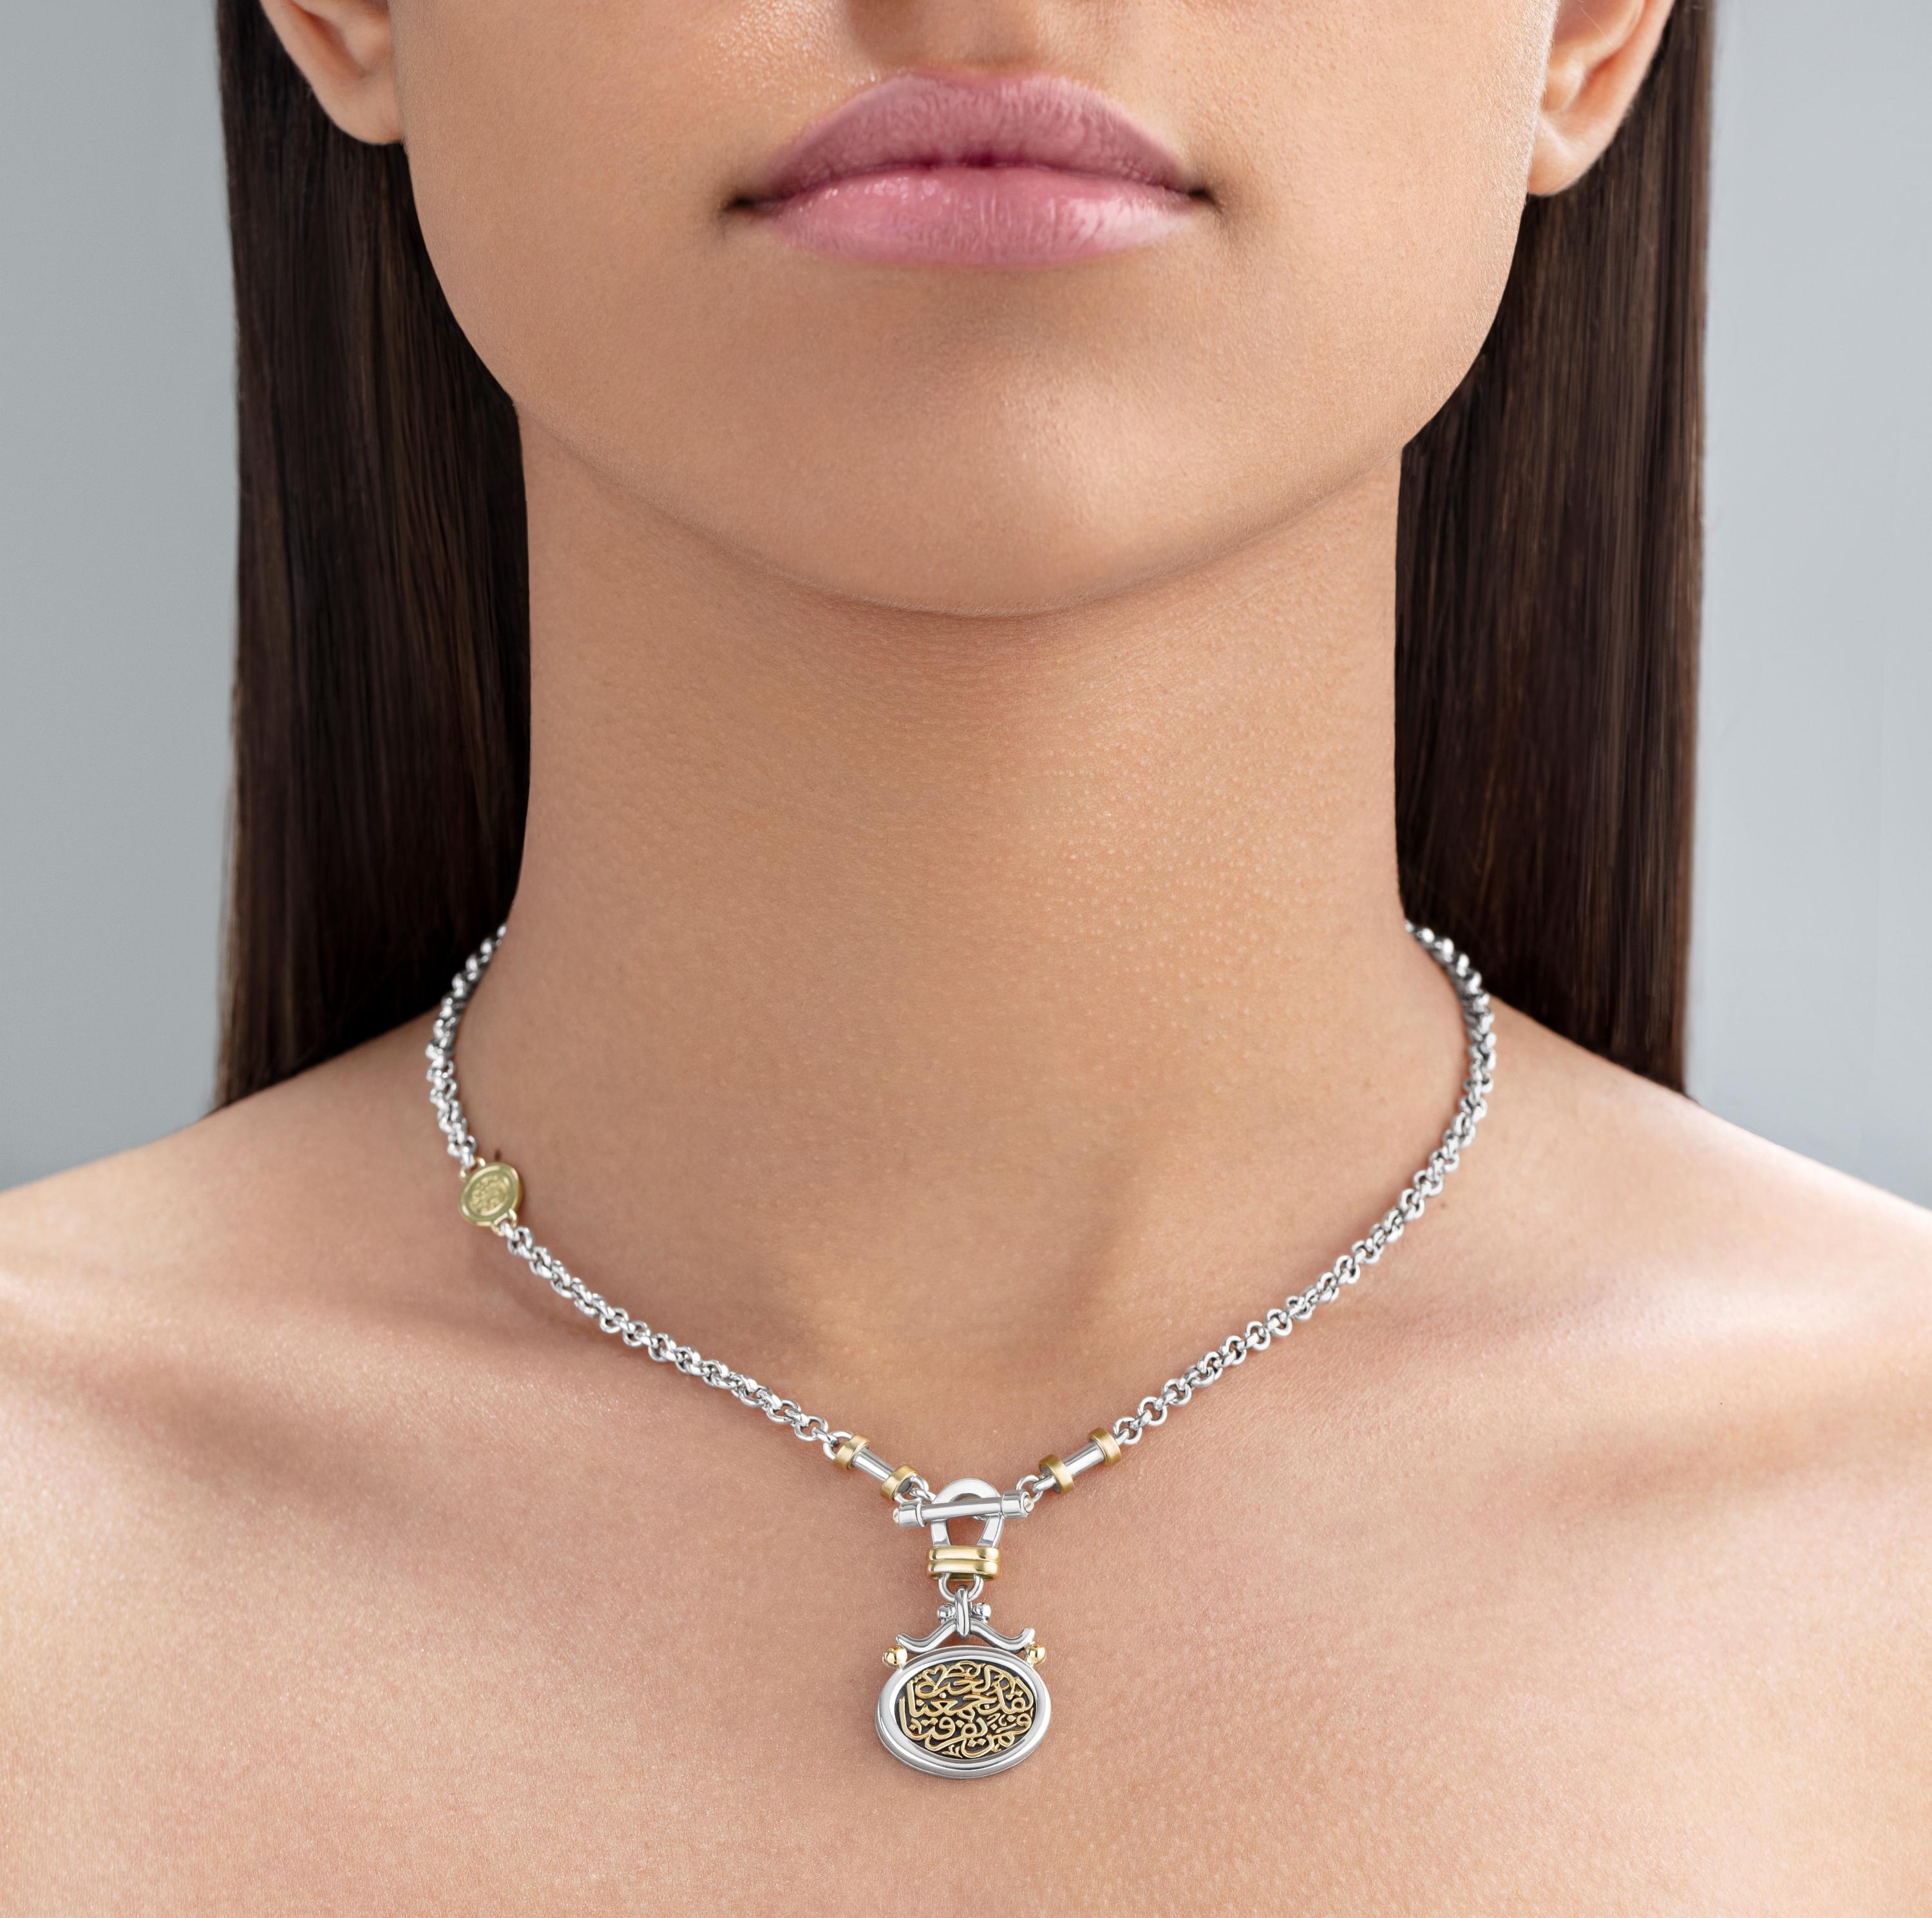 18 Karat Gold and Sterling Silver Classic Calligraphy necklace adorned with Pearls. 

Azza Fahmy's signature T-Lock necklace adorned with 0.05gm Pearl T-Lock end stones and the love words of Gibran Khalil Gibran - 'لقد جمعنا الحب فمن يفرقنا' , which